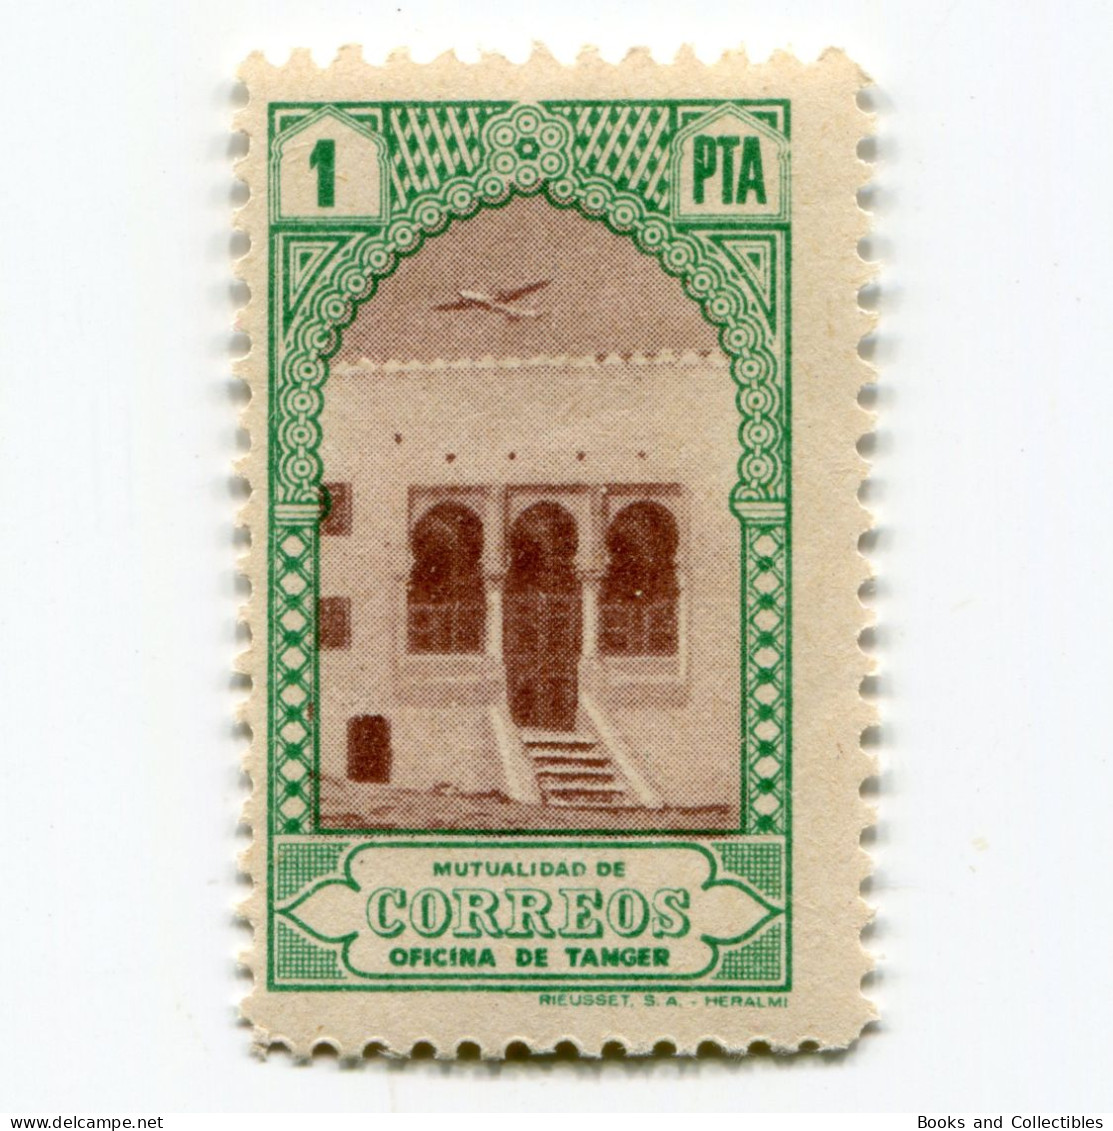 [FBL ● A-01] SPANISH TANGIER - 1946 - Beneficent Stamps - 1 Pta - Edifil ES-TNG BE26 - Liefdadigheid